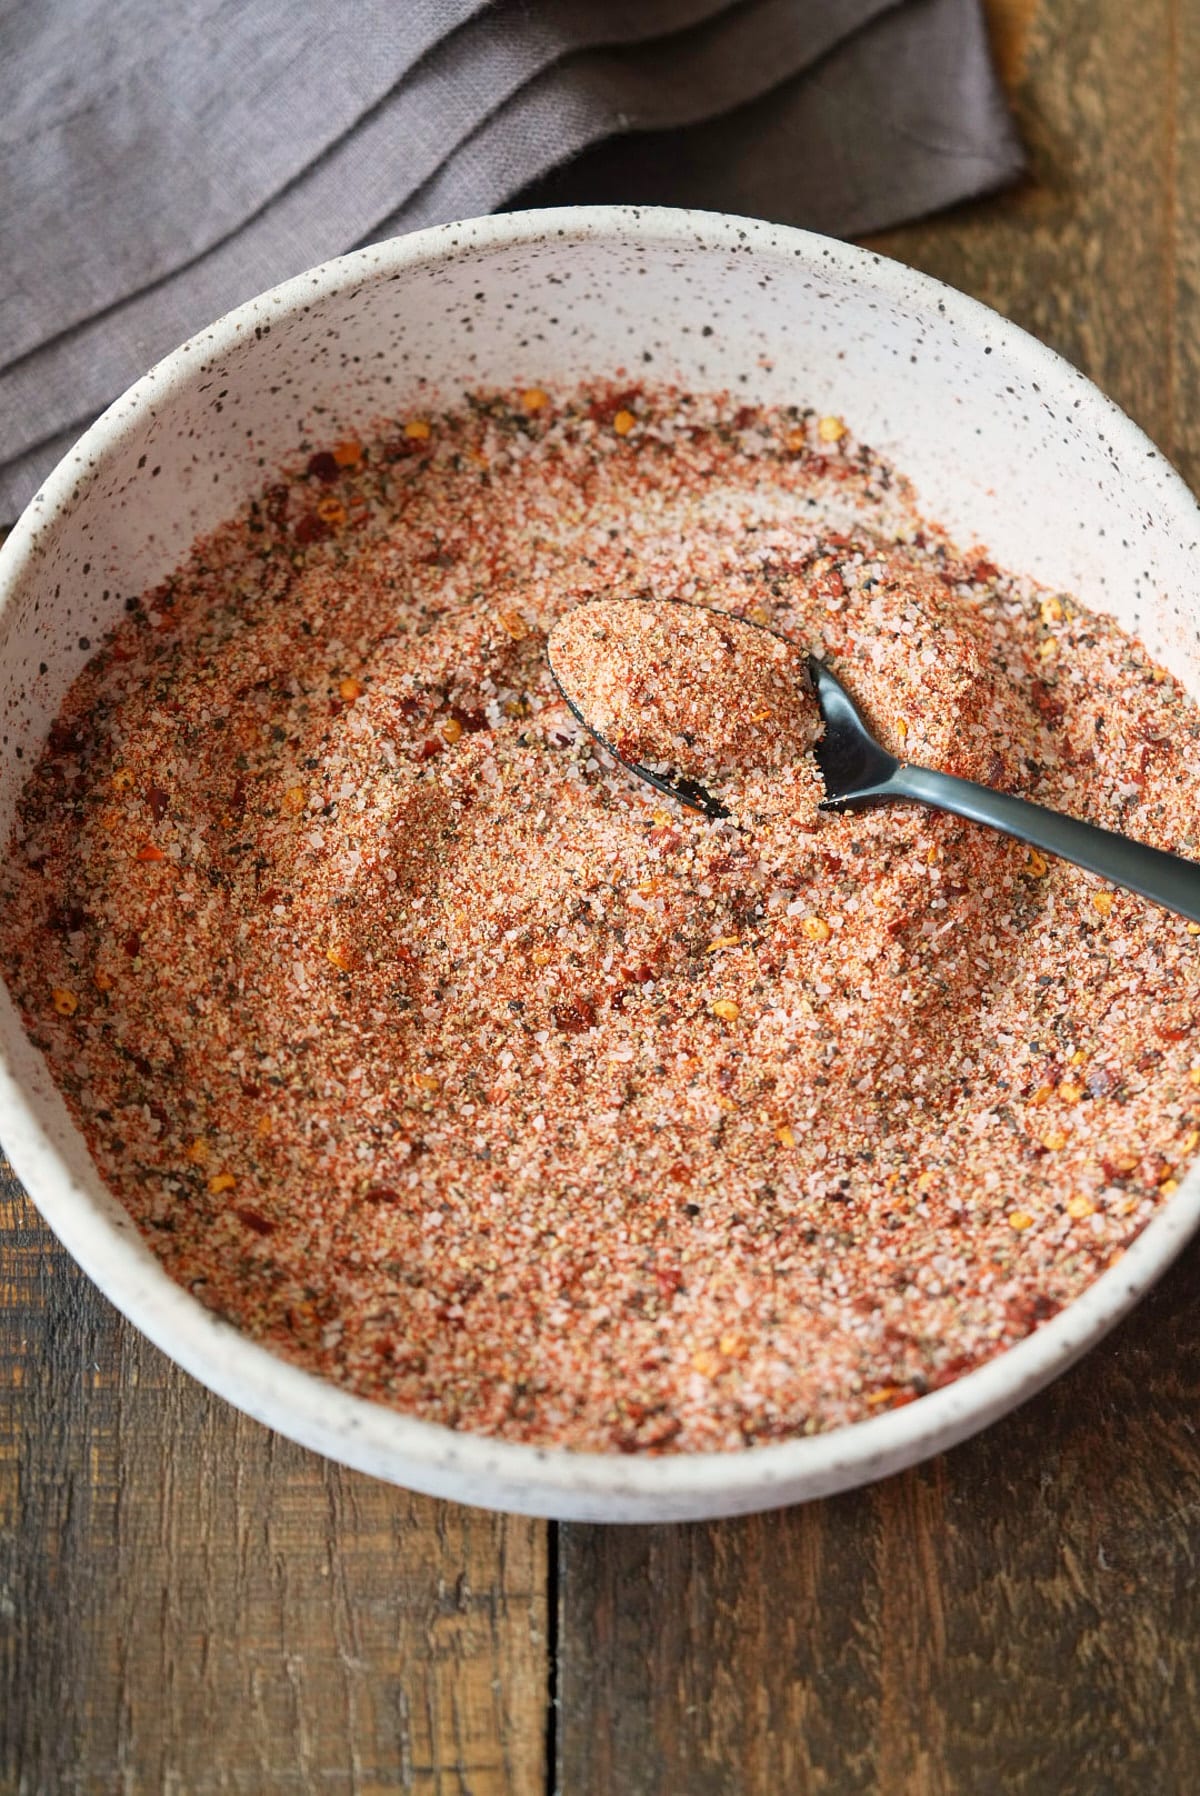 A bowl filled with steak seasoning.